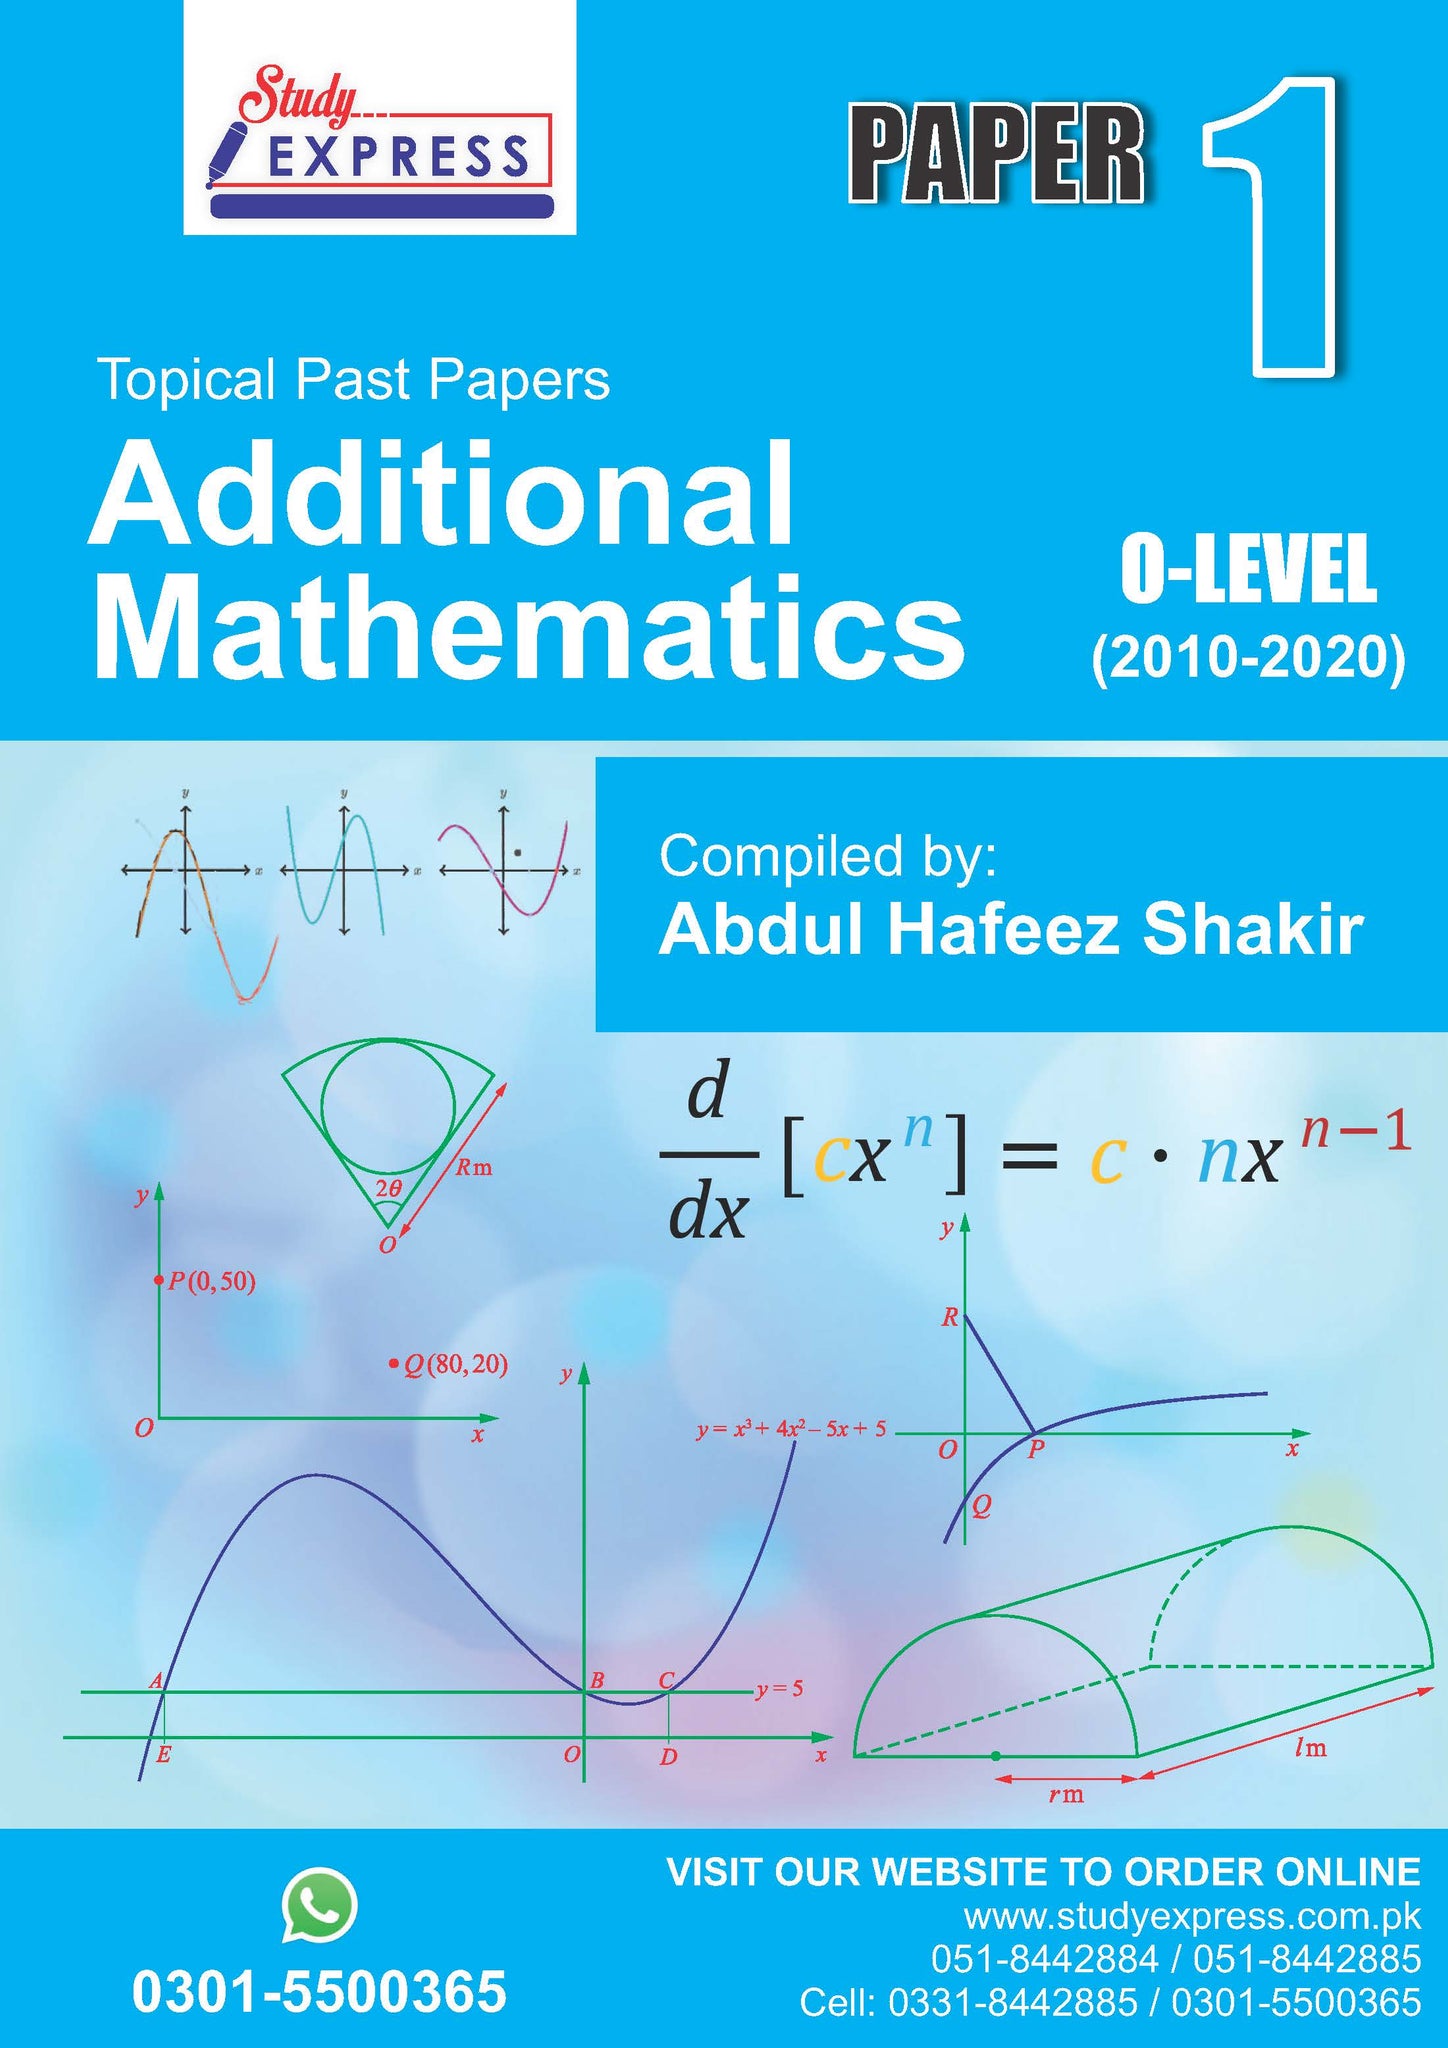 Topical Past Papers Additional Mathematics P 1 O-Level (2010-2020) Compiled By Abdul Hafeez Shakir